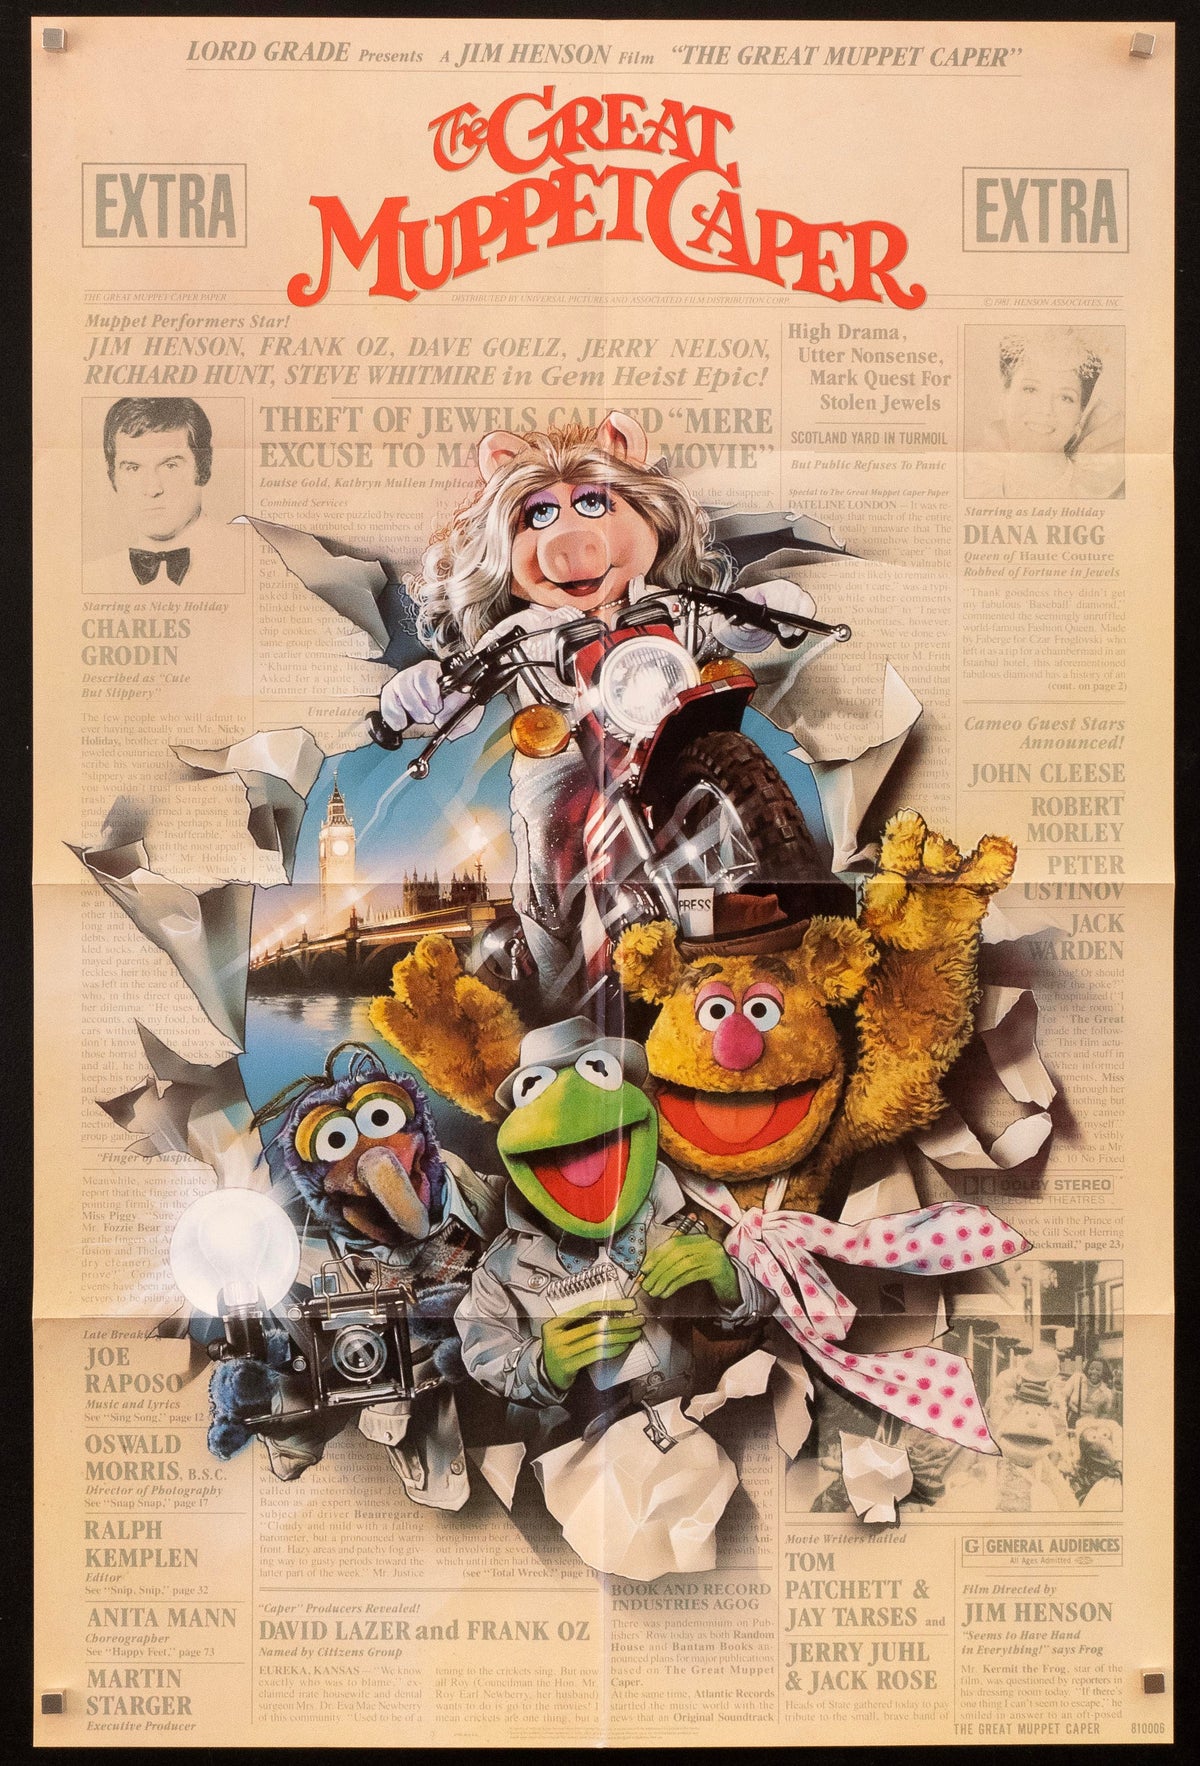 The Great Muppet Caper 1 Sheet (27x41) Original Vintage Movie Poster